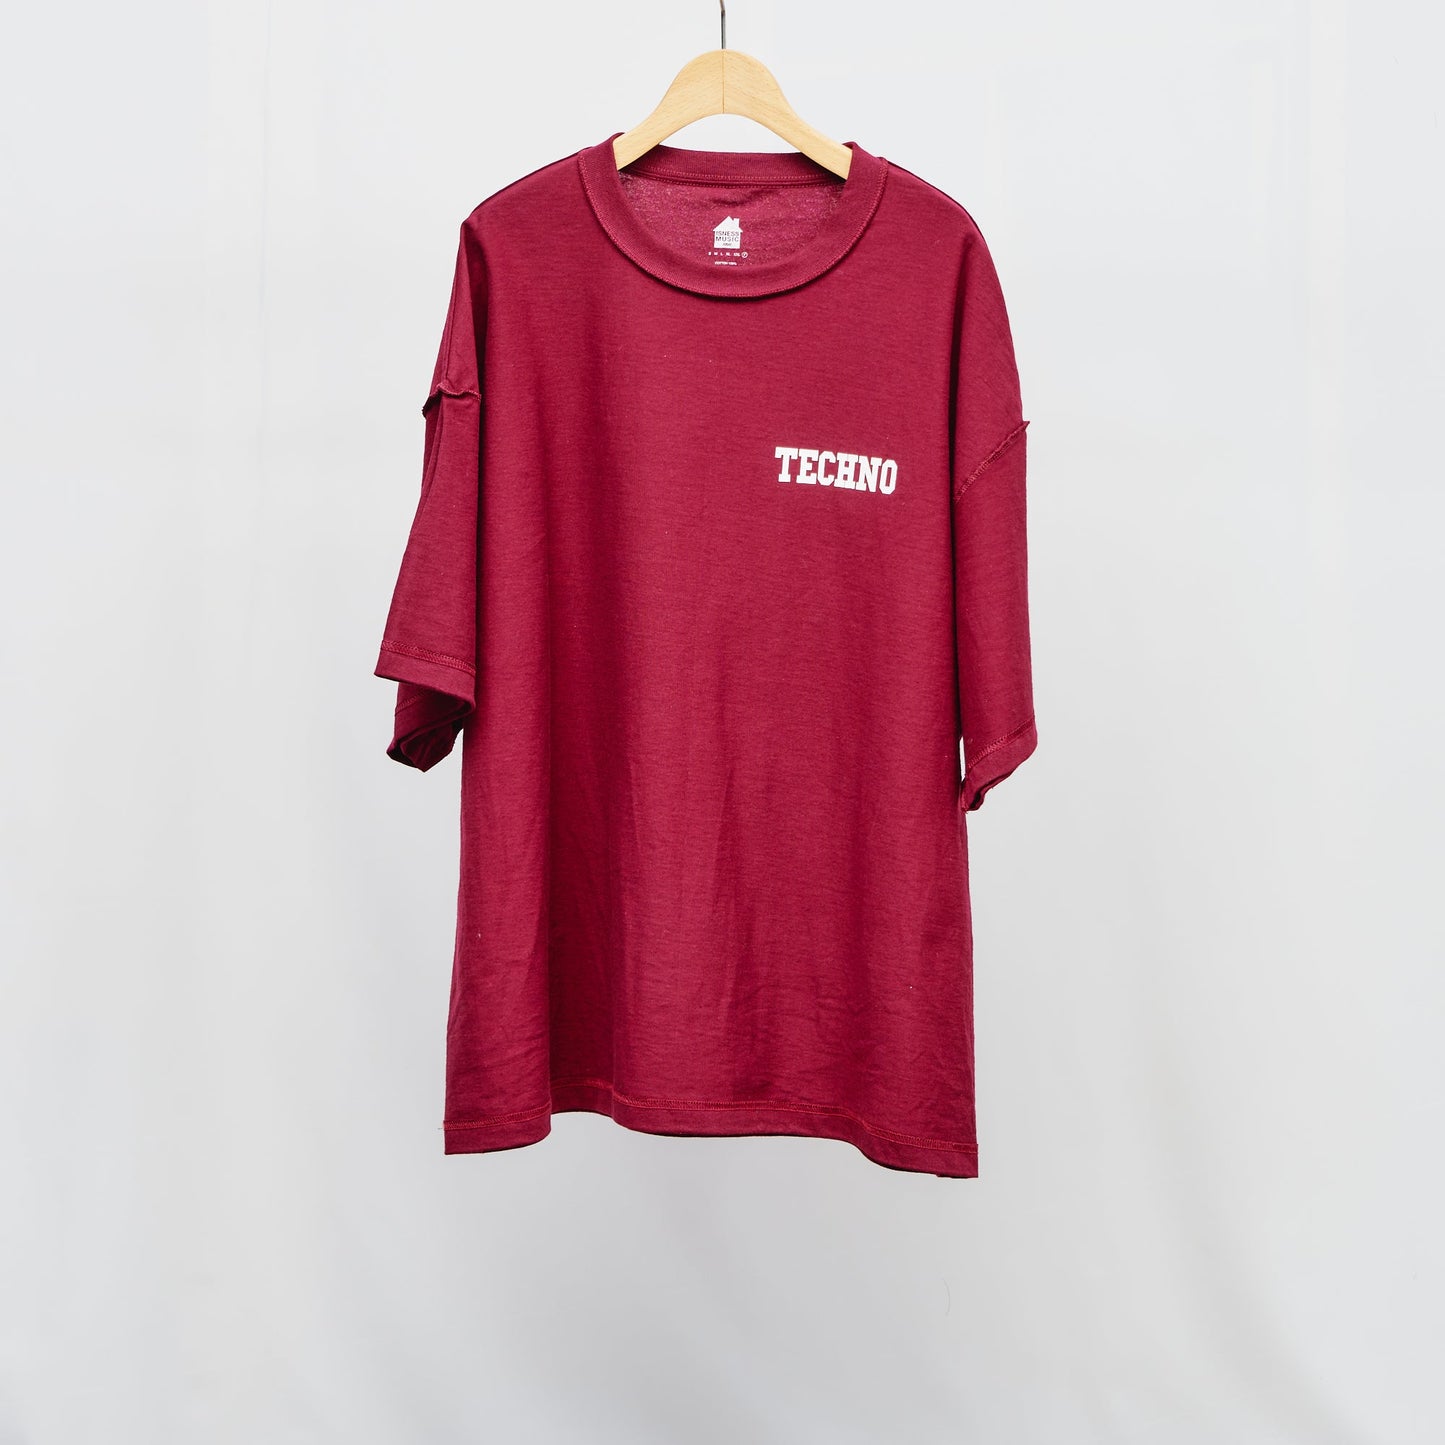 TECHNO S/S T-SHIRTS is-ness online shop 2